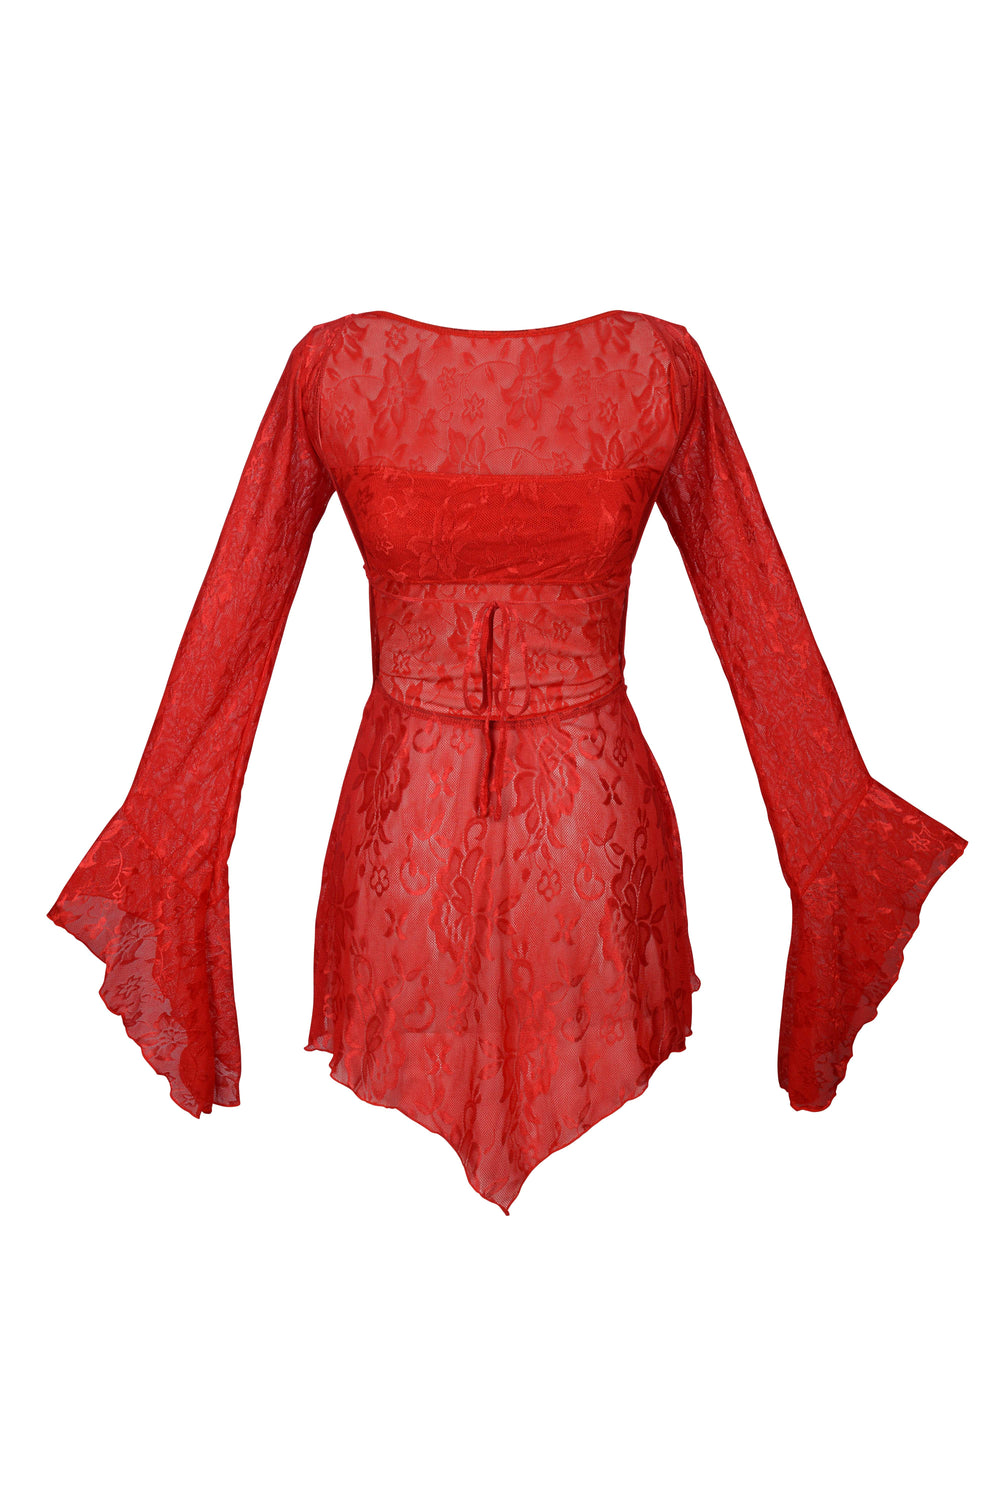 POSY BACKLESS PIXIE DRESS - RED LACE - Her Pony